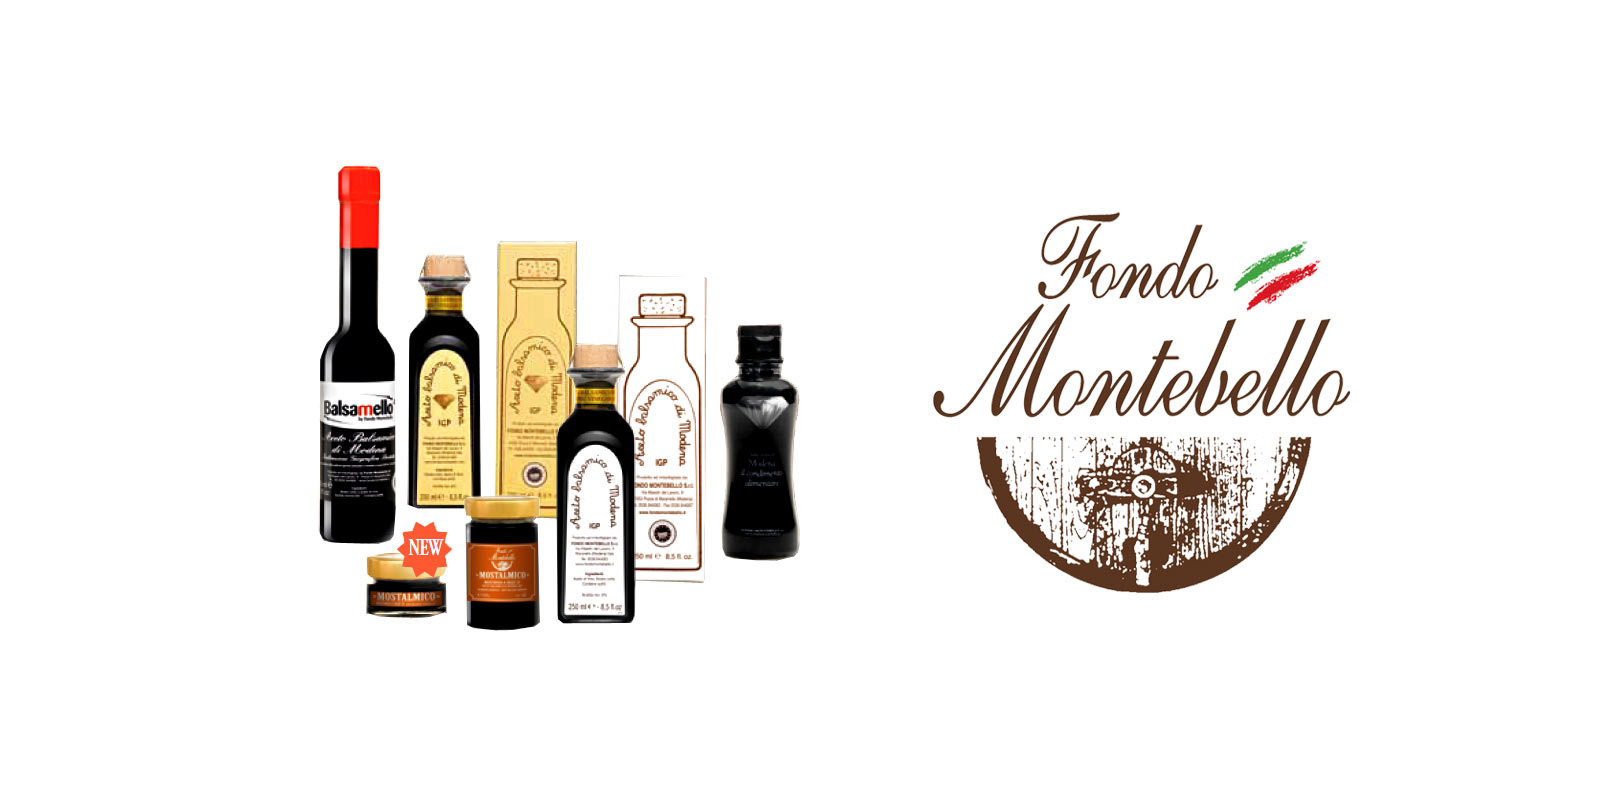 Aceto Balsamico Fondo Montebello Fondo Montebello use ancient and traditional production methods to produce an excellent balsamic vinegar from the Maranello region in Italy.